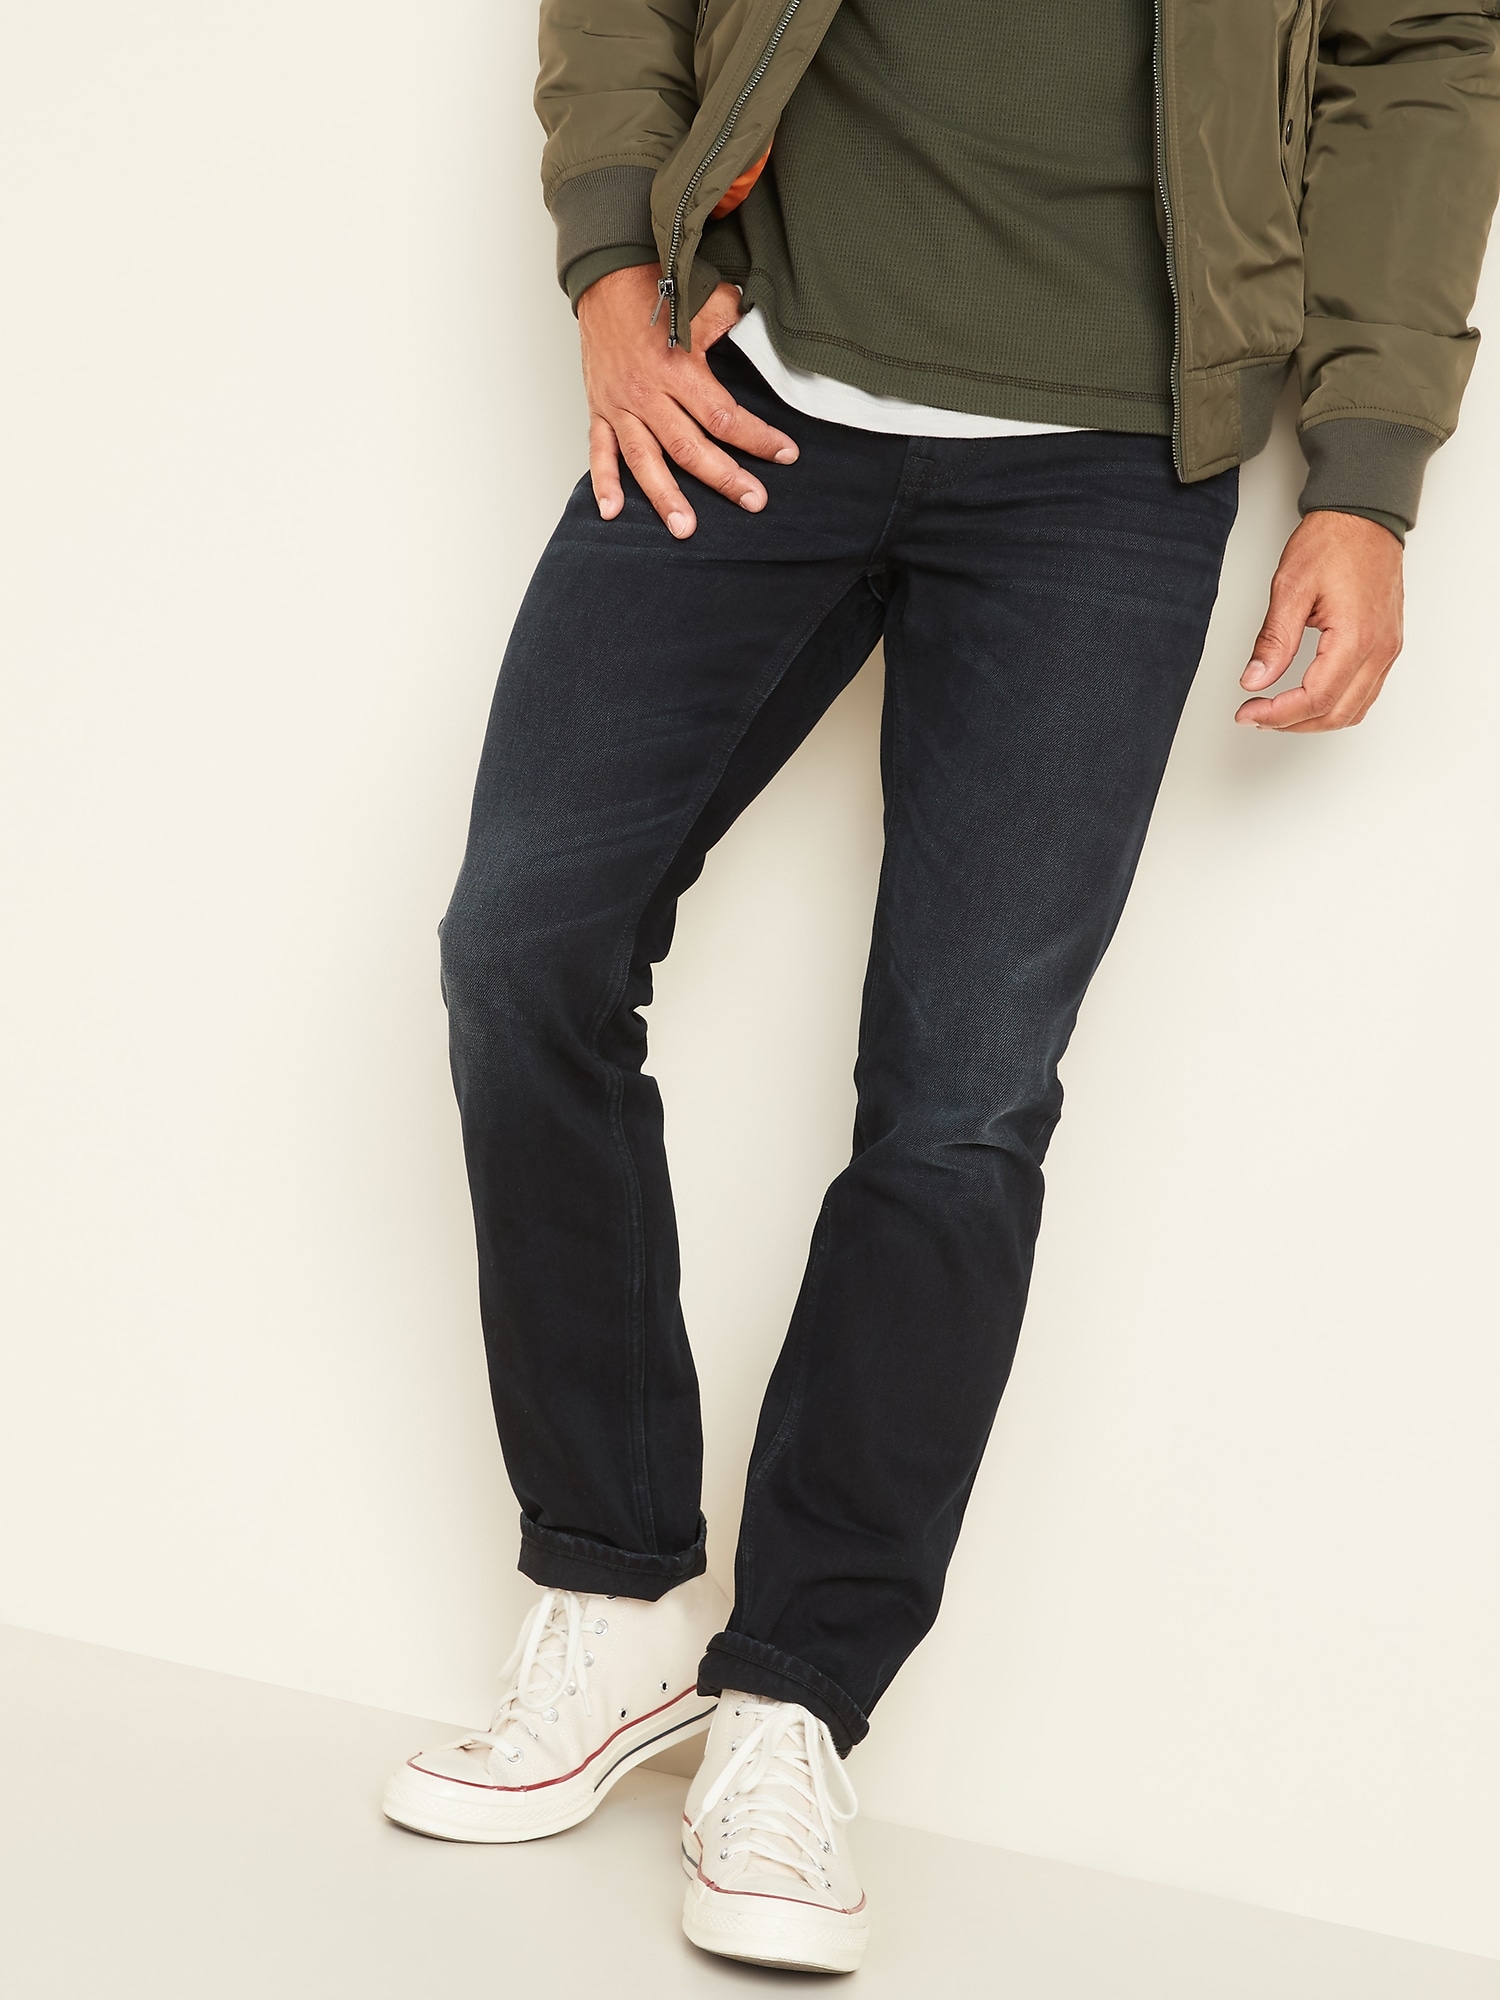 non stretch skinny jeans mens